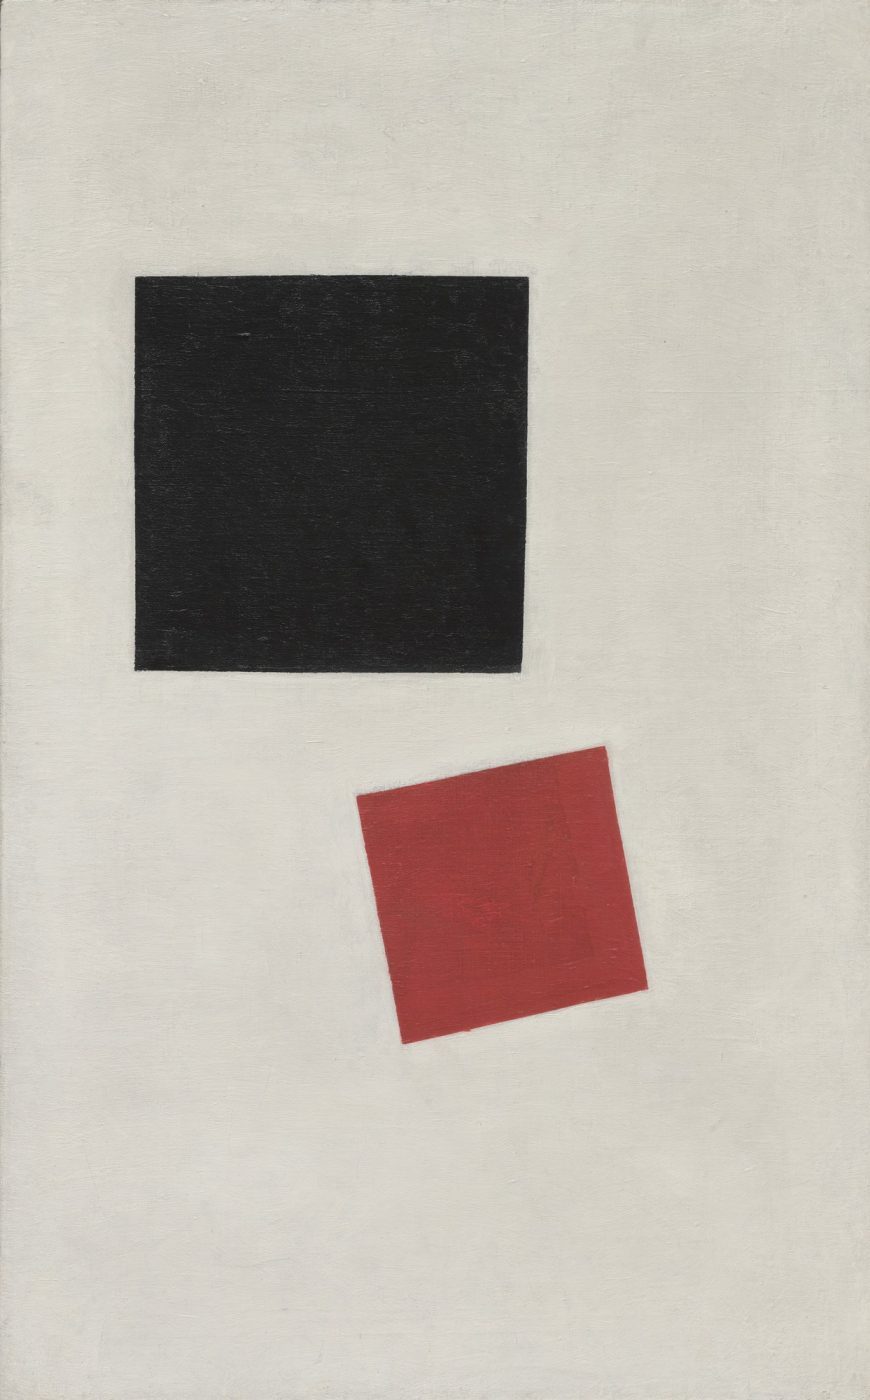 Kazimir Malevich, Painterly Realism of a Boy with a Knapsack. Color Masses in the Fourth Dimension, 1915, oil on canvas, 71.1 x 44.5 cm (MoMA).